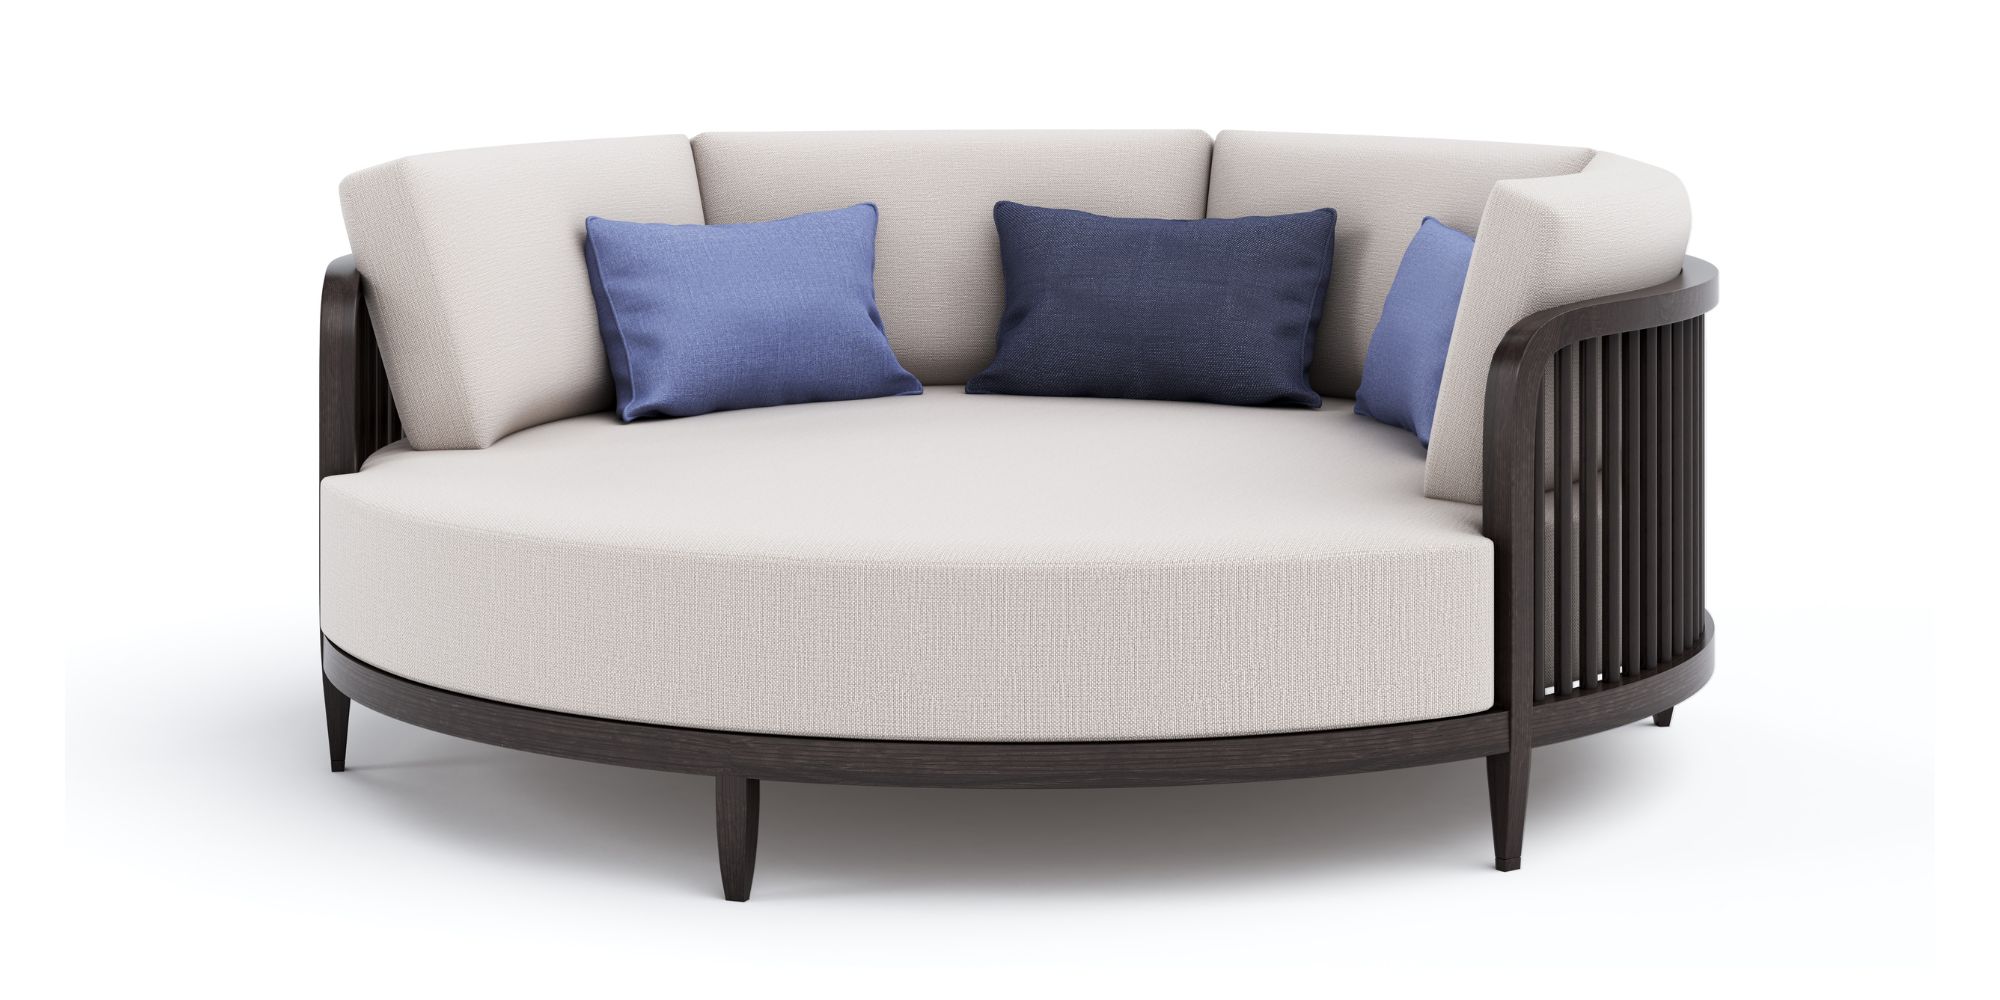 Bolgheri Sofa Unbuttoned in Outdoor Sofas for Bolgheri collection